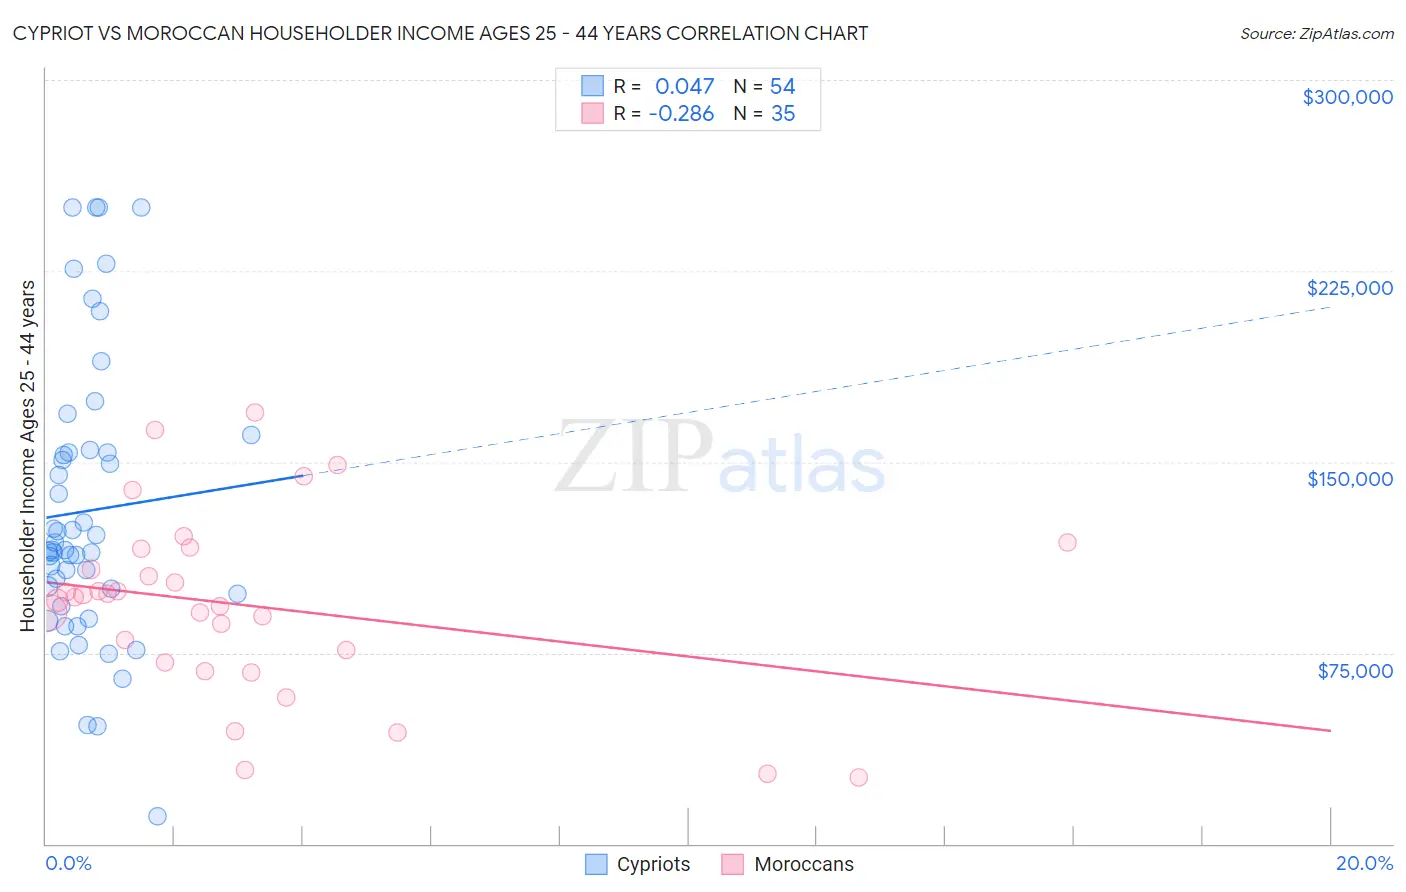 Cypriot vs Moroccan Householder Income Ages 25 - 44 years